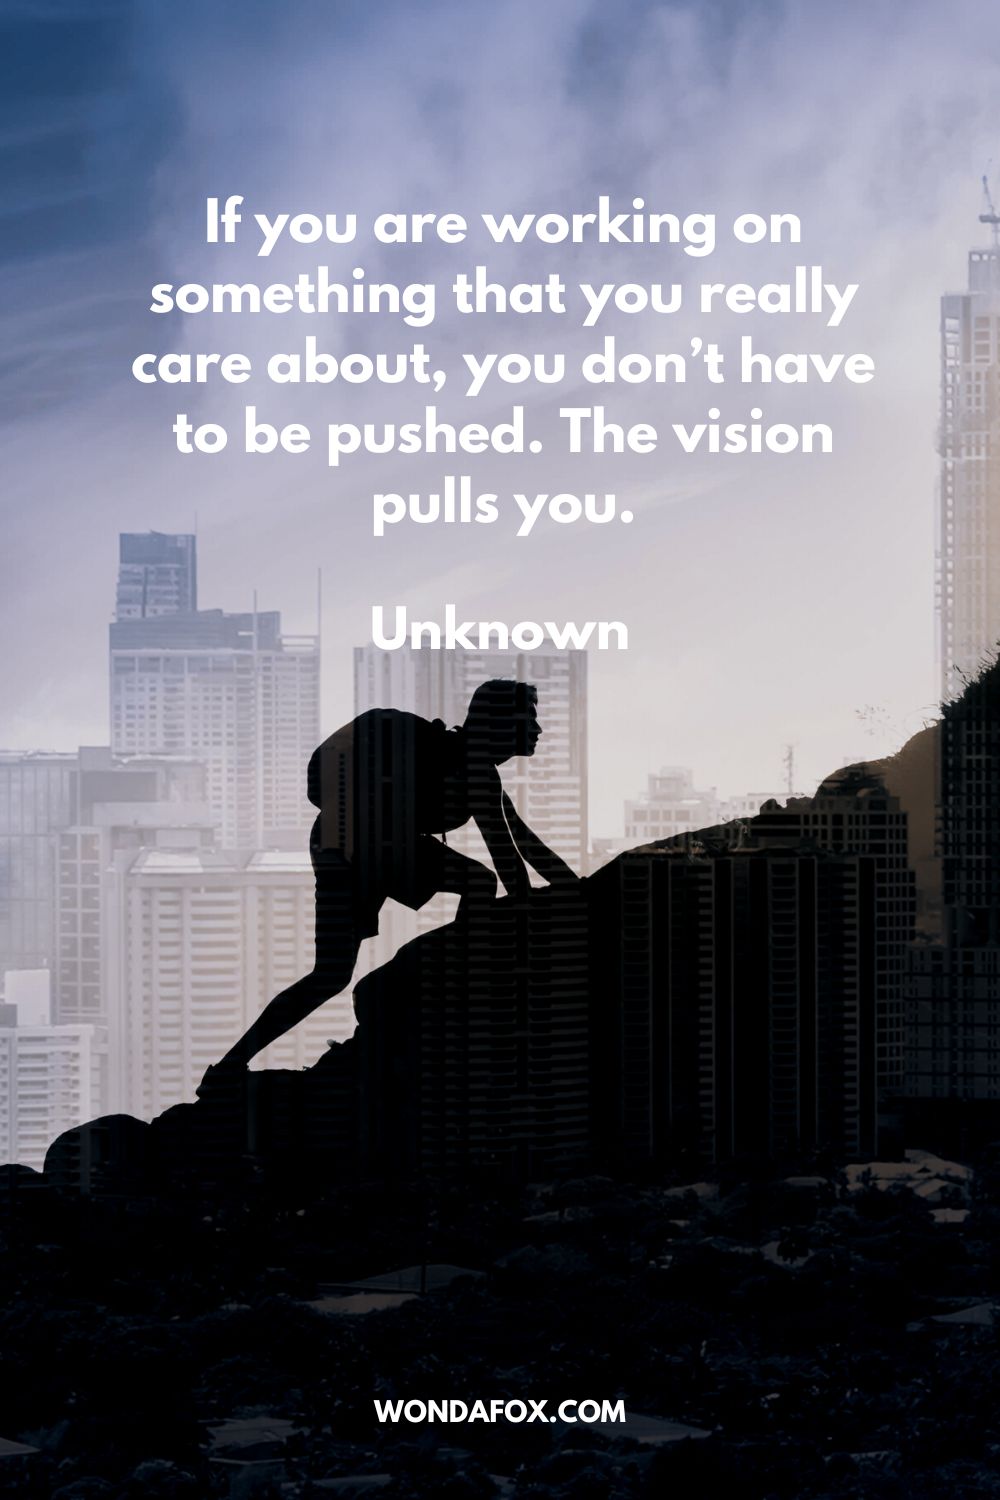 If you are working on something that you really care about, you don’t have to be pushed. The vision pulls you. Unknown